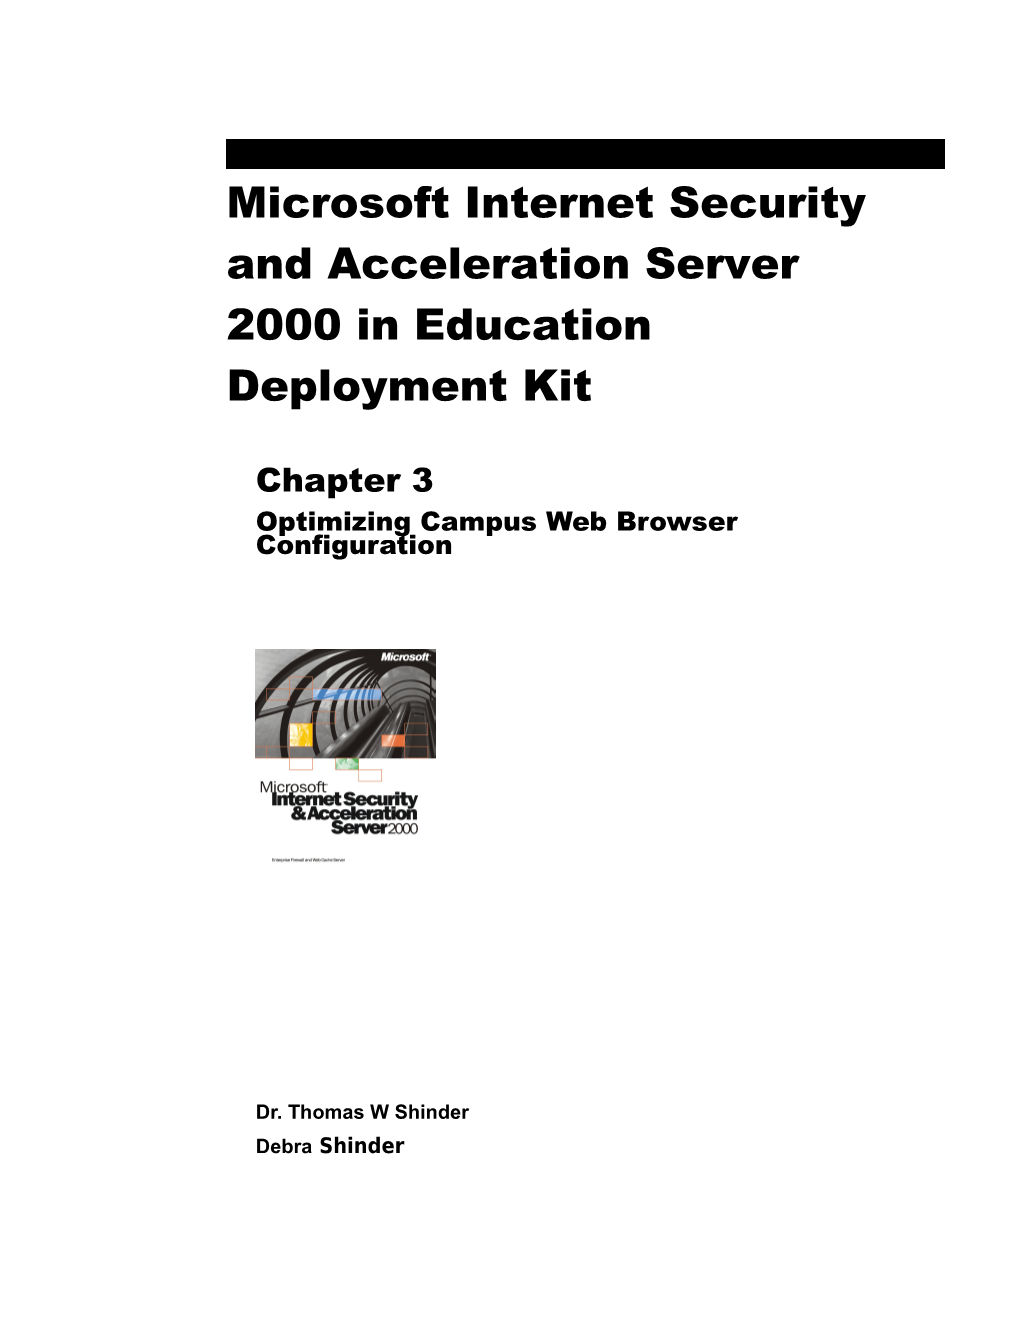 Microsoft Internet Security and Acceleration Server 2000 in Education Deployment Kit